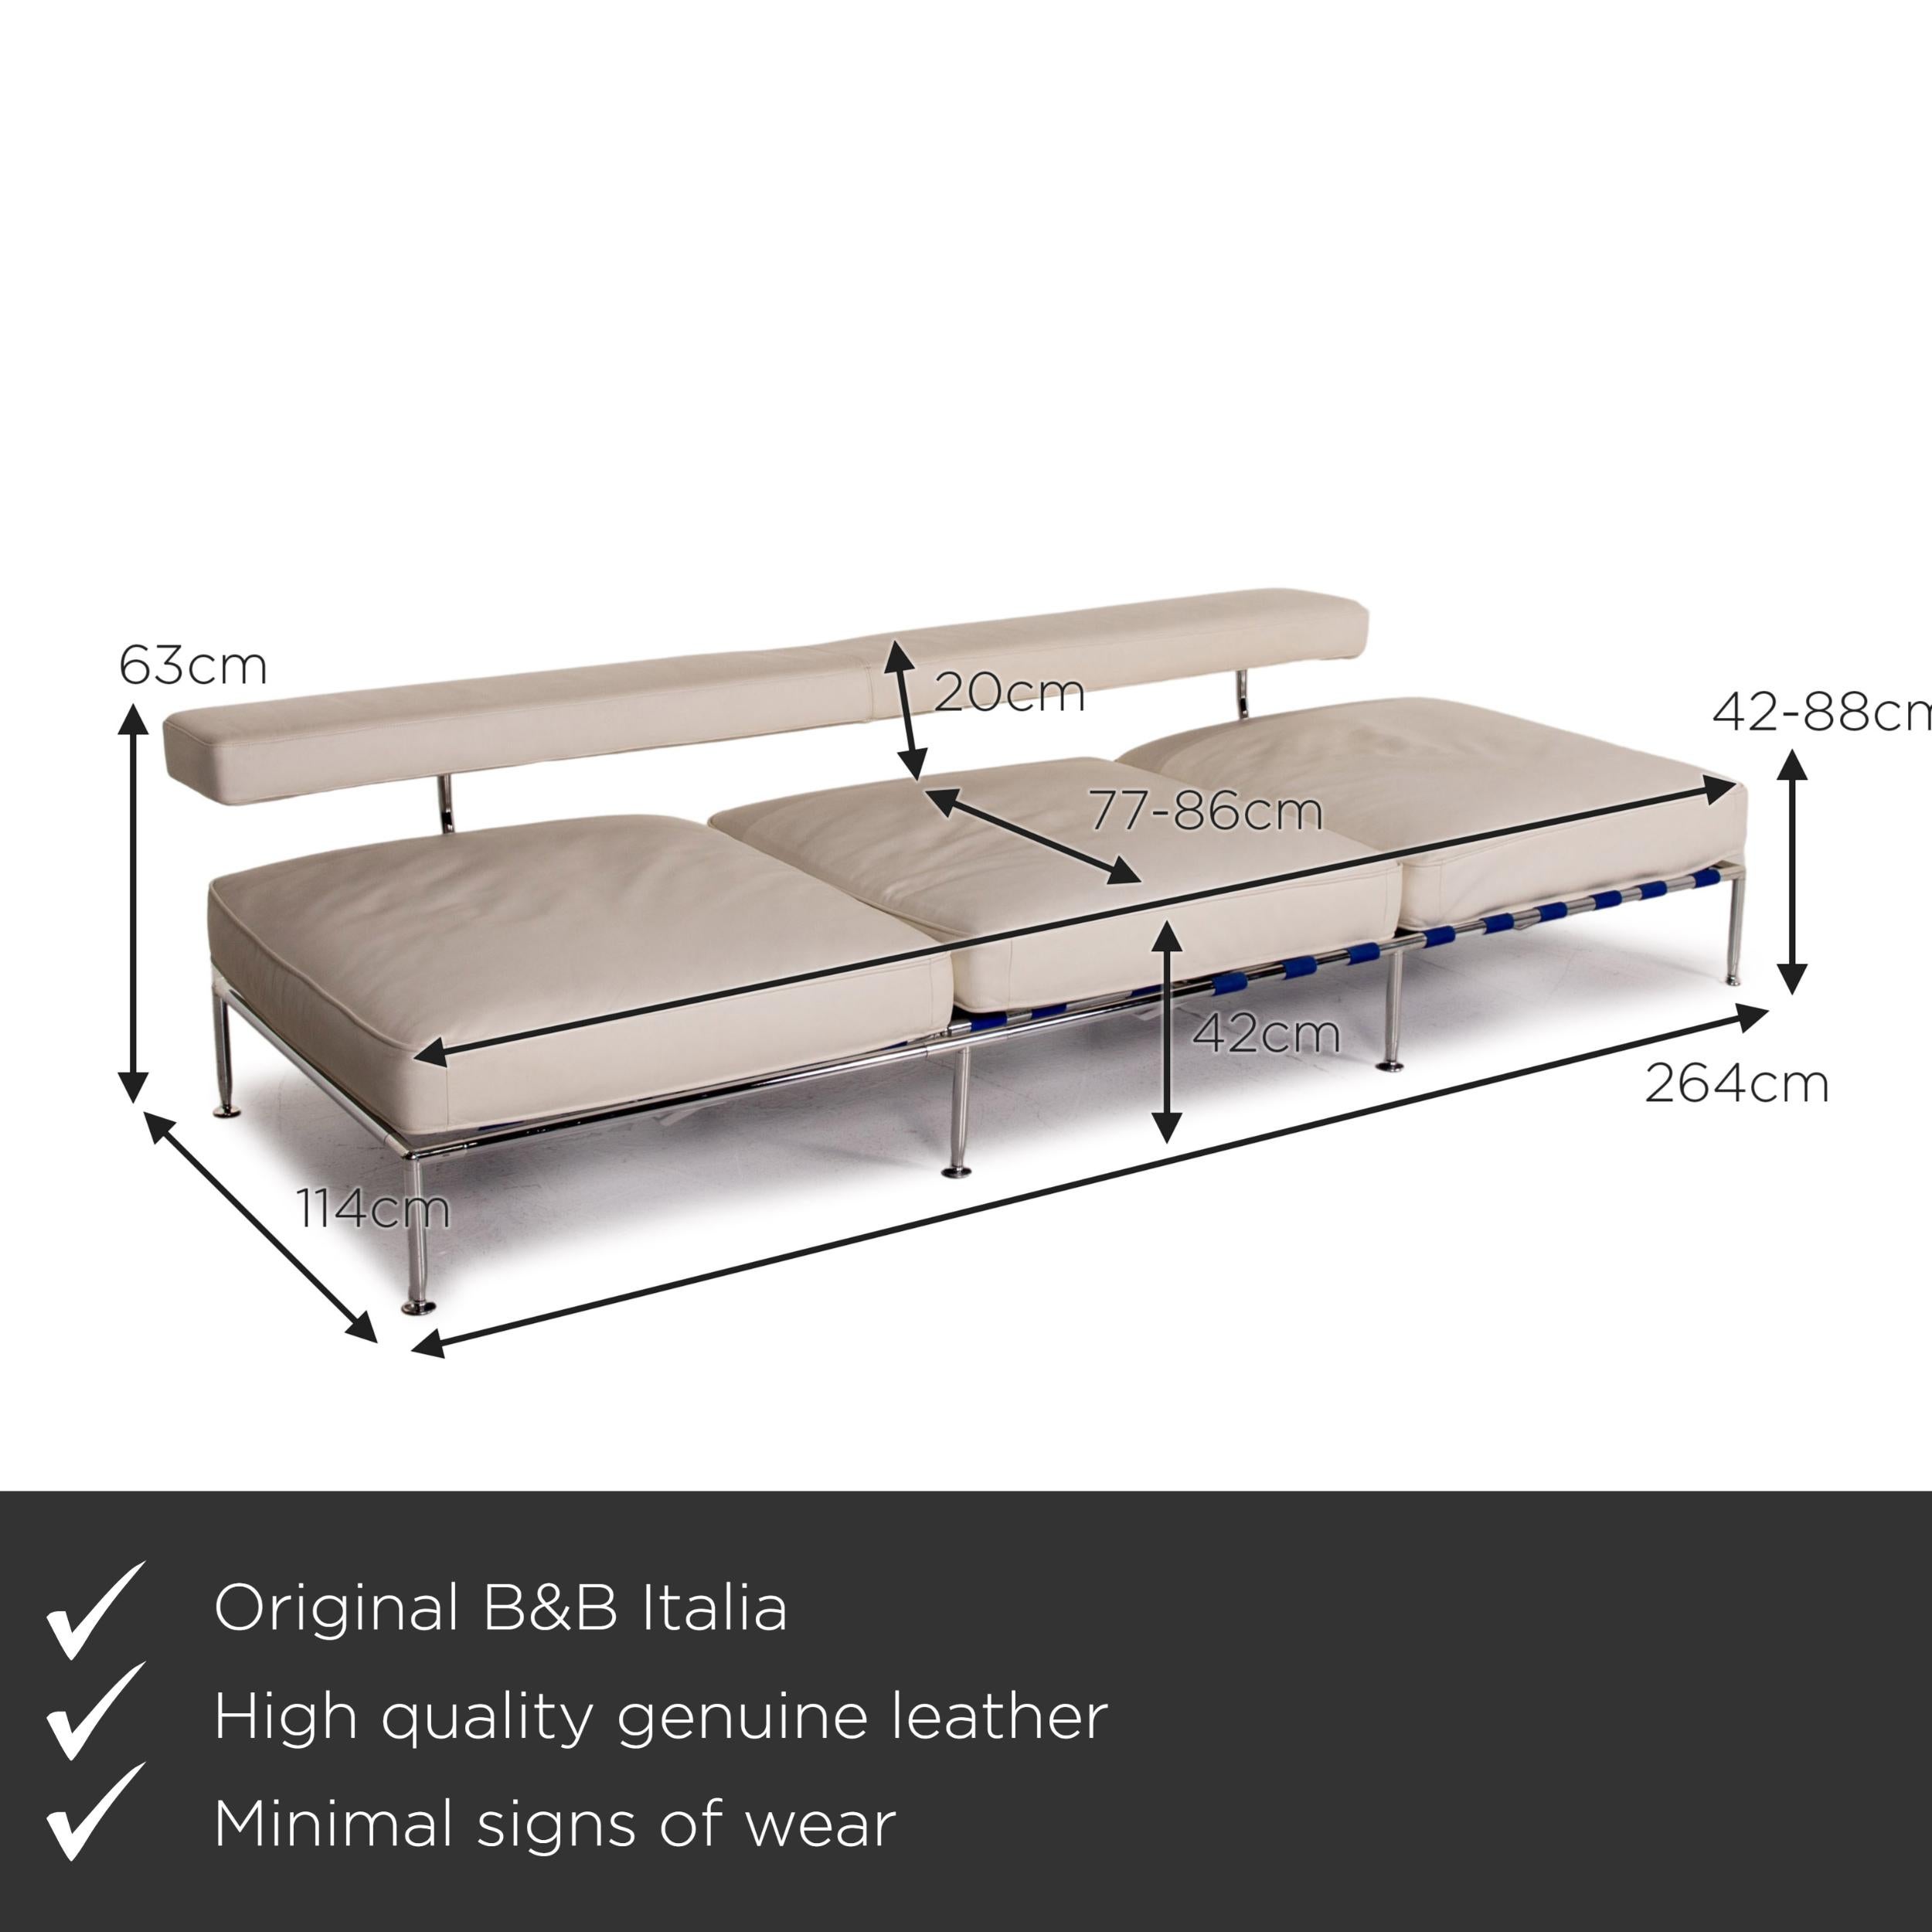 We present to you a B&B Italia free time leather lounger white daybed sleeping function sofa bed.
  
 

 Product measurements in centimeters:
 

Depth 114
Width 264
Height 63
Seat height 42
Rest height 42
Seat depth 77
Seat width